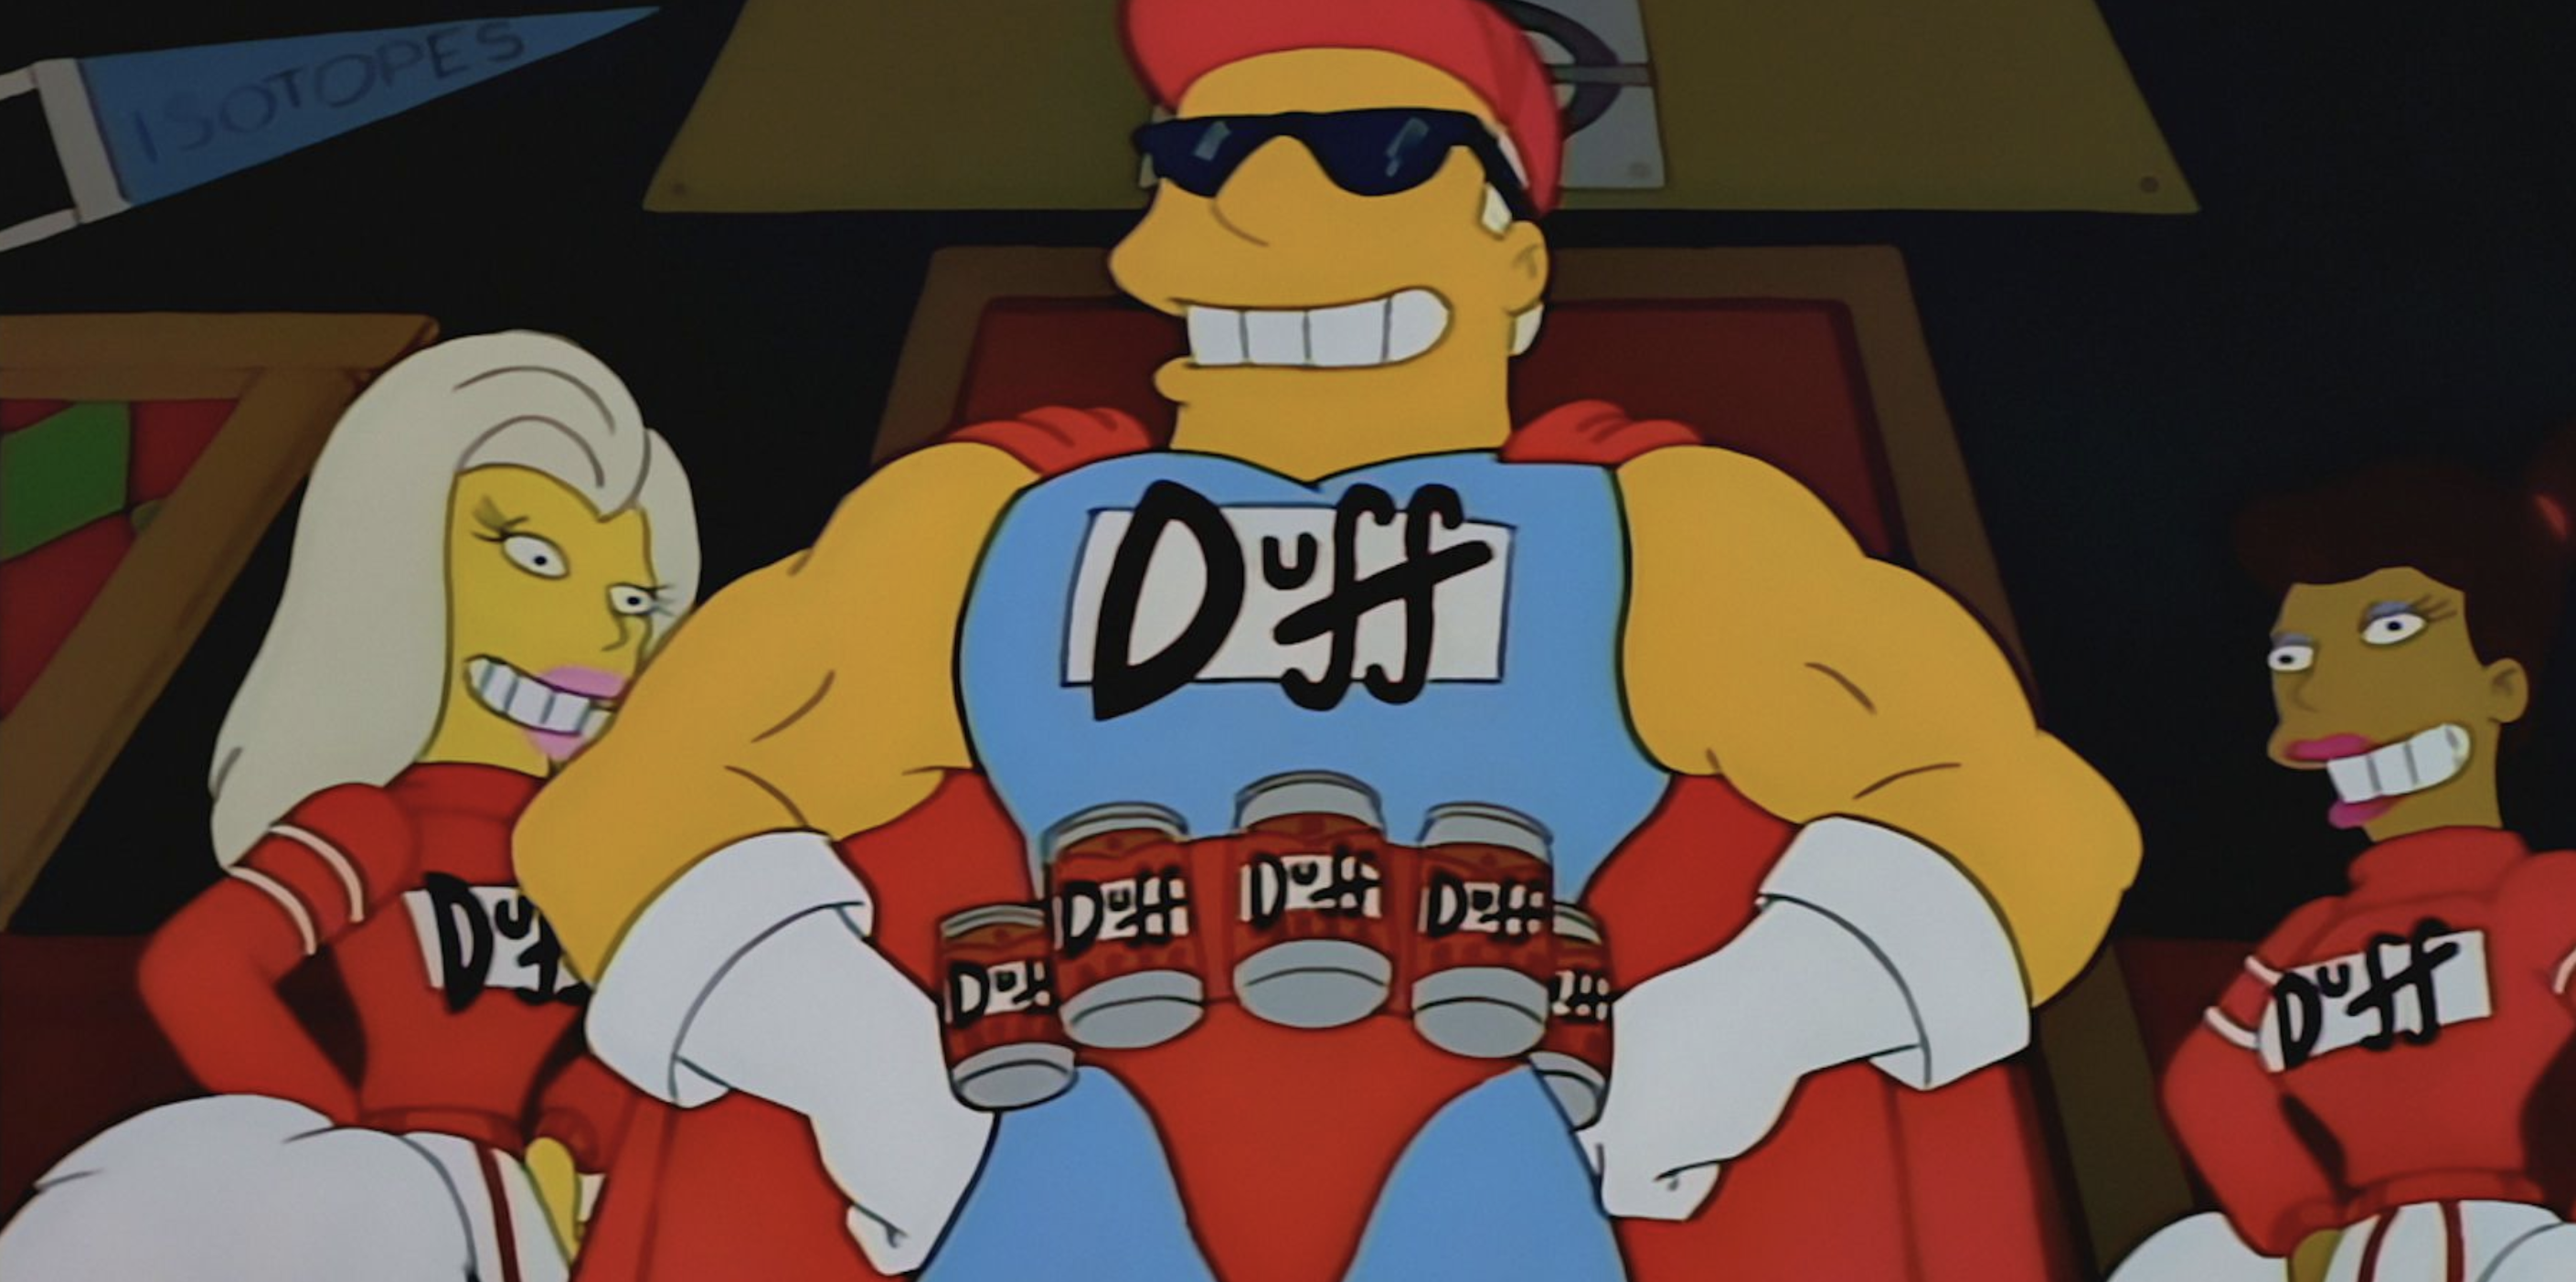 Duffman, a giant muscly man in a superhero outfit, stands with his hands on his hips - he has a belt with beer cans strapped to it